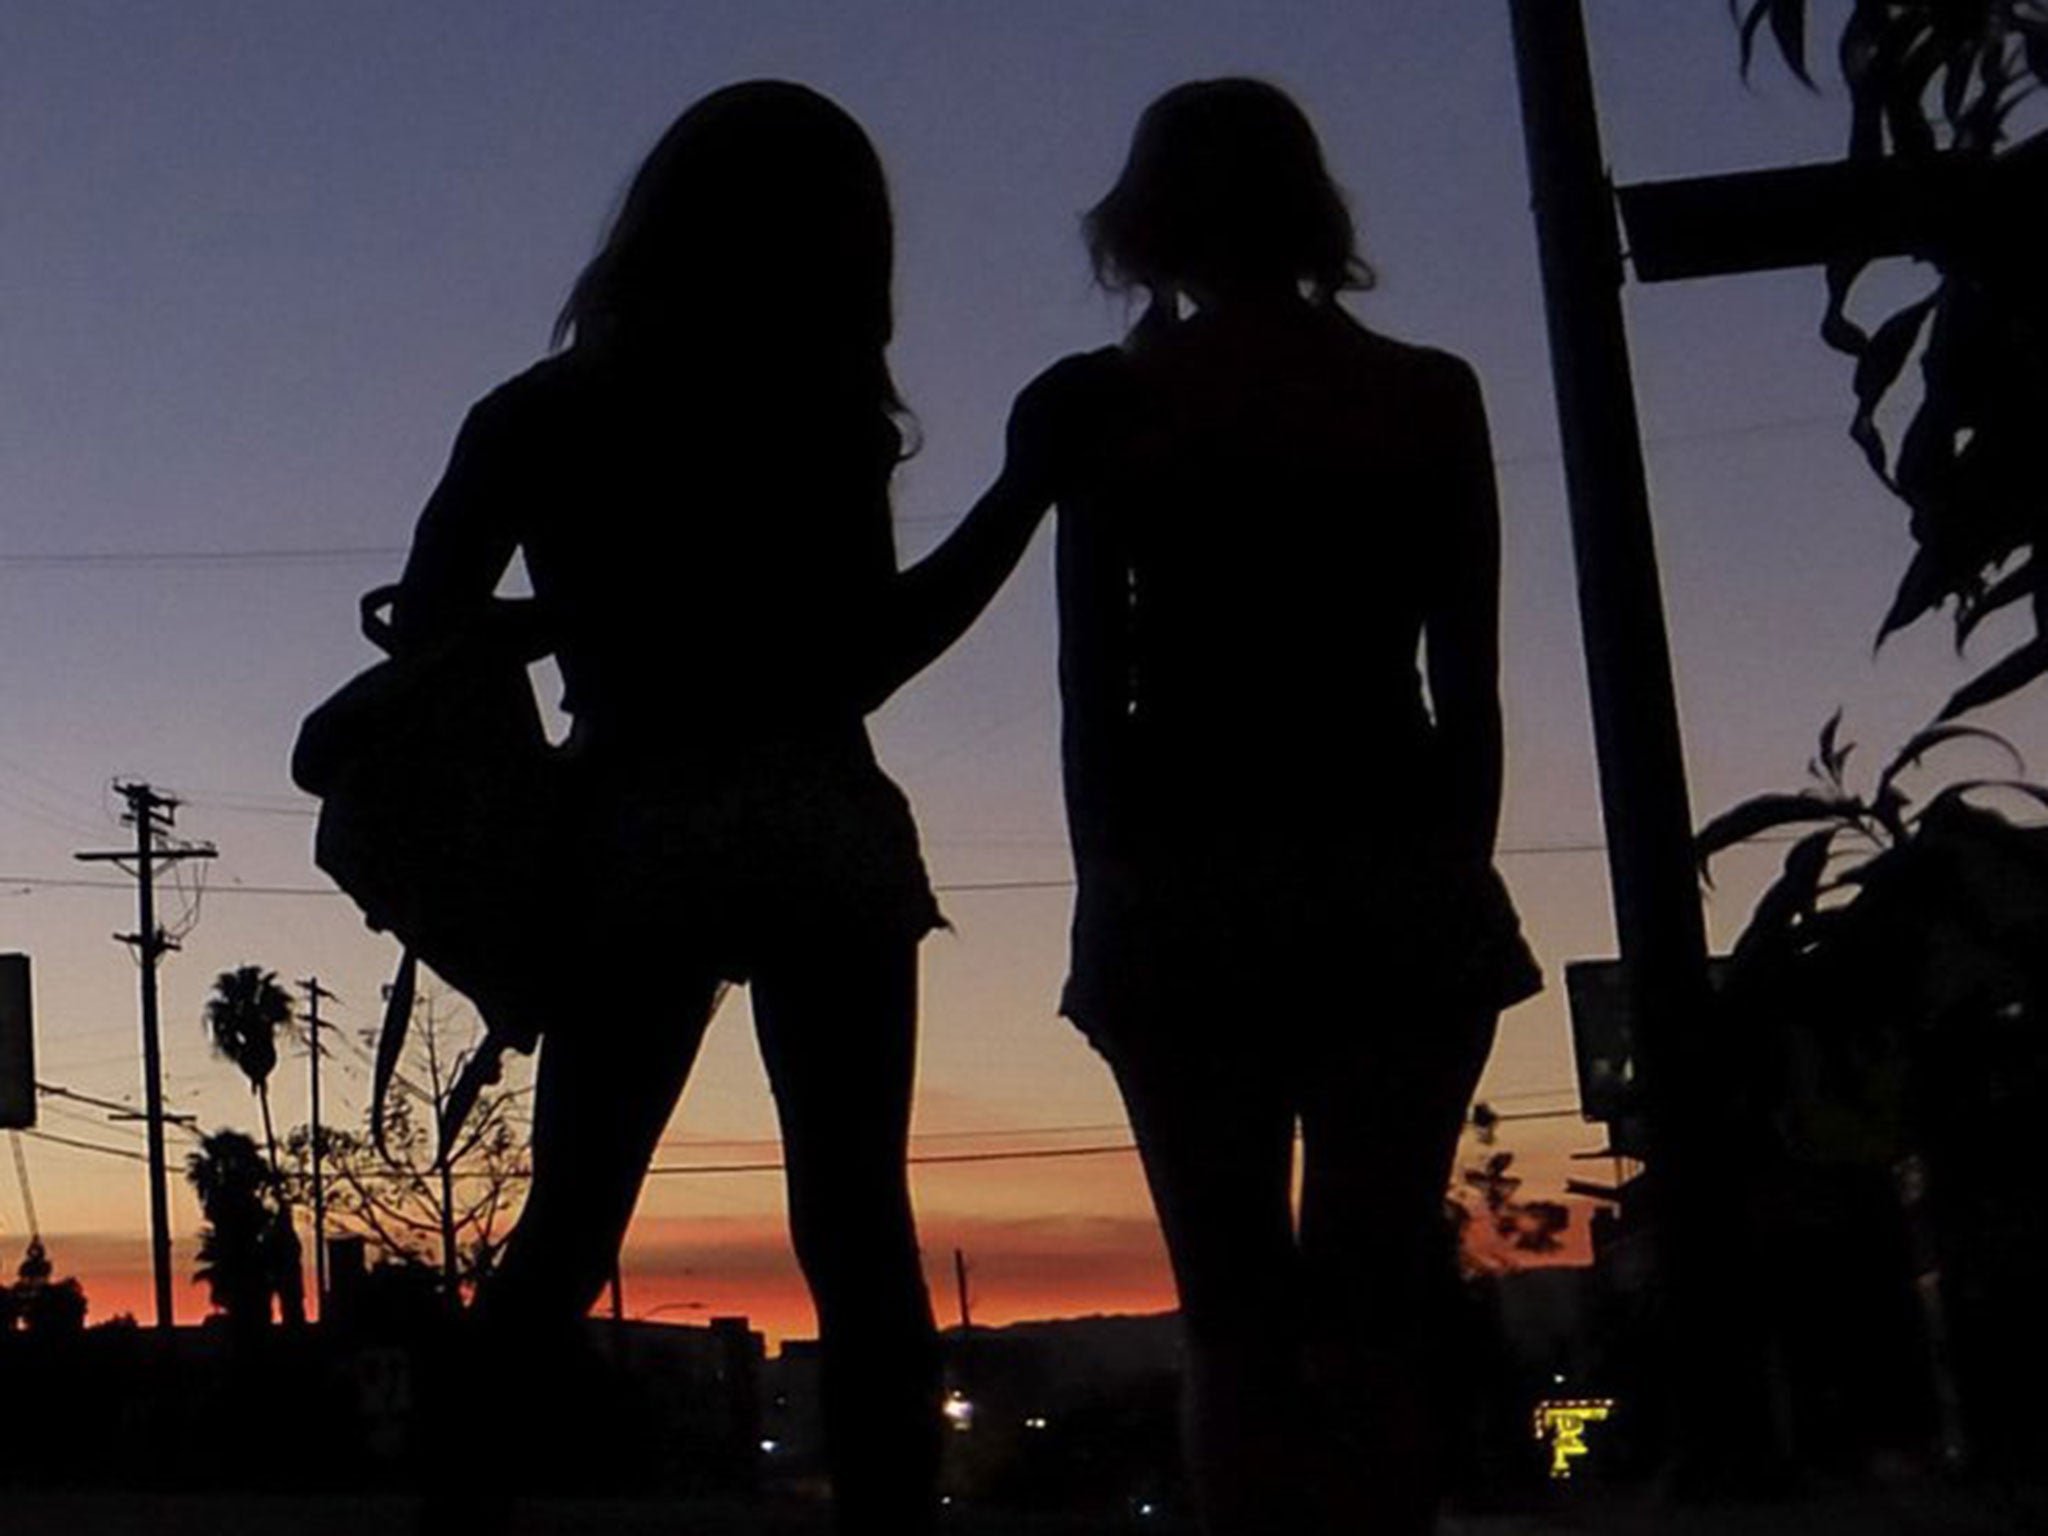 Trans prostitute movie Tangerine received a warm reception at the Sundance Film Festival